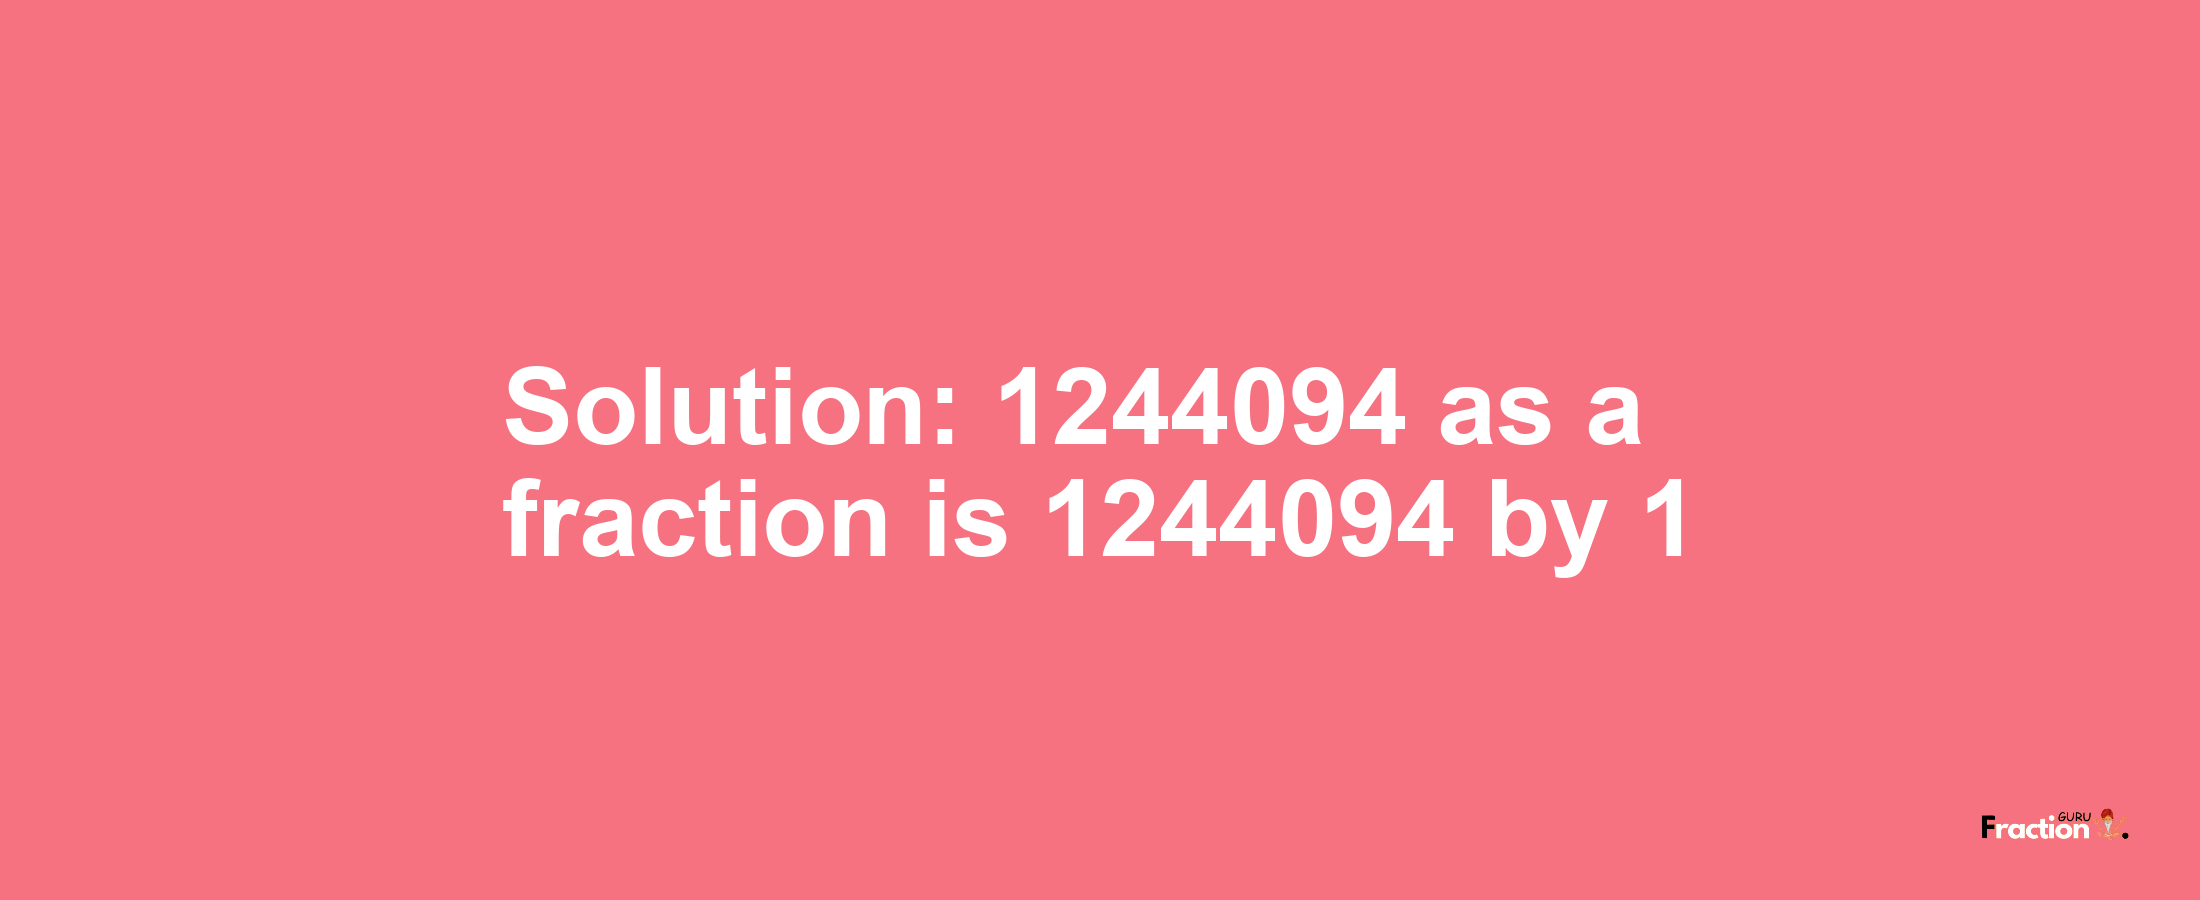 Solution:1244094 as a fraction is 1244094/1